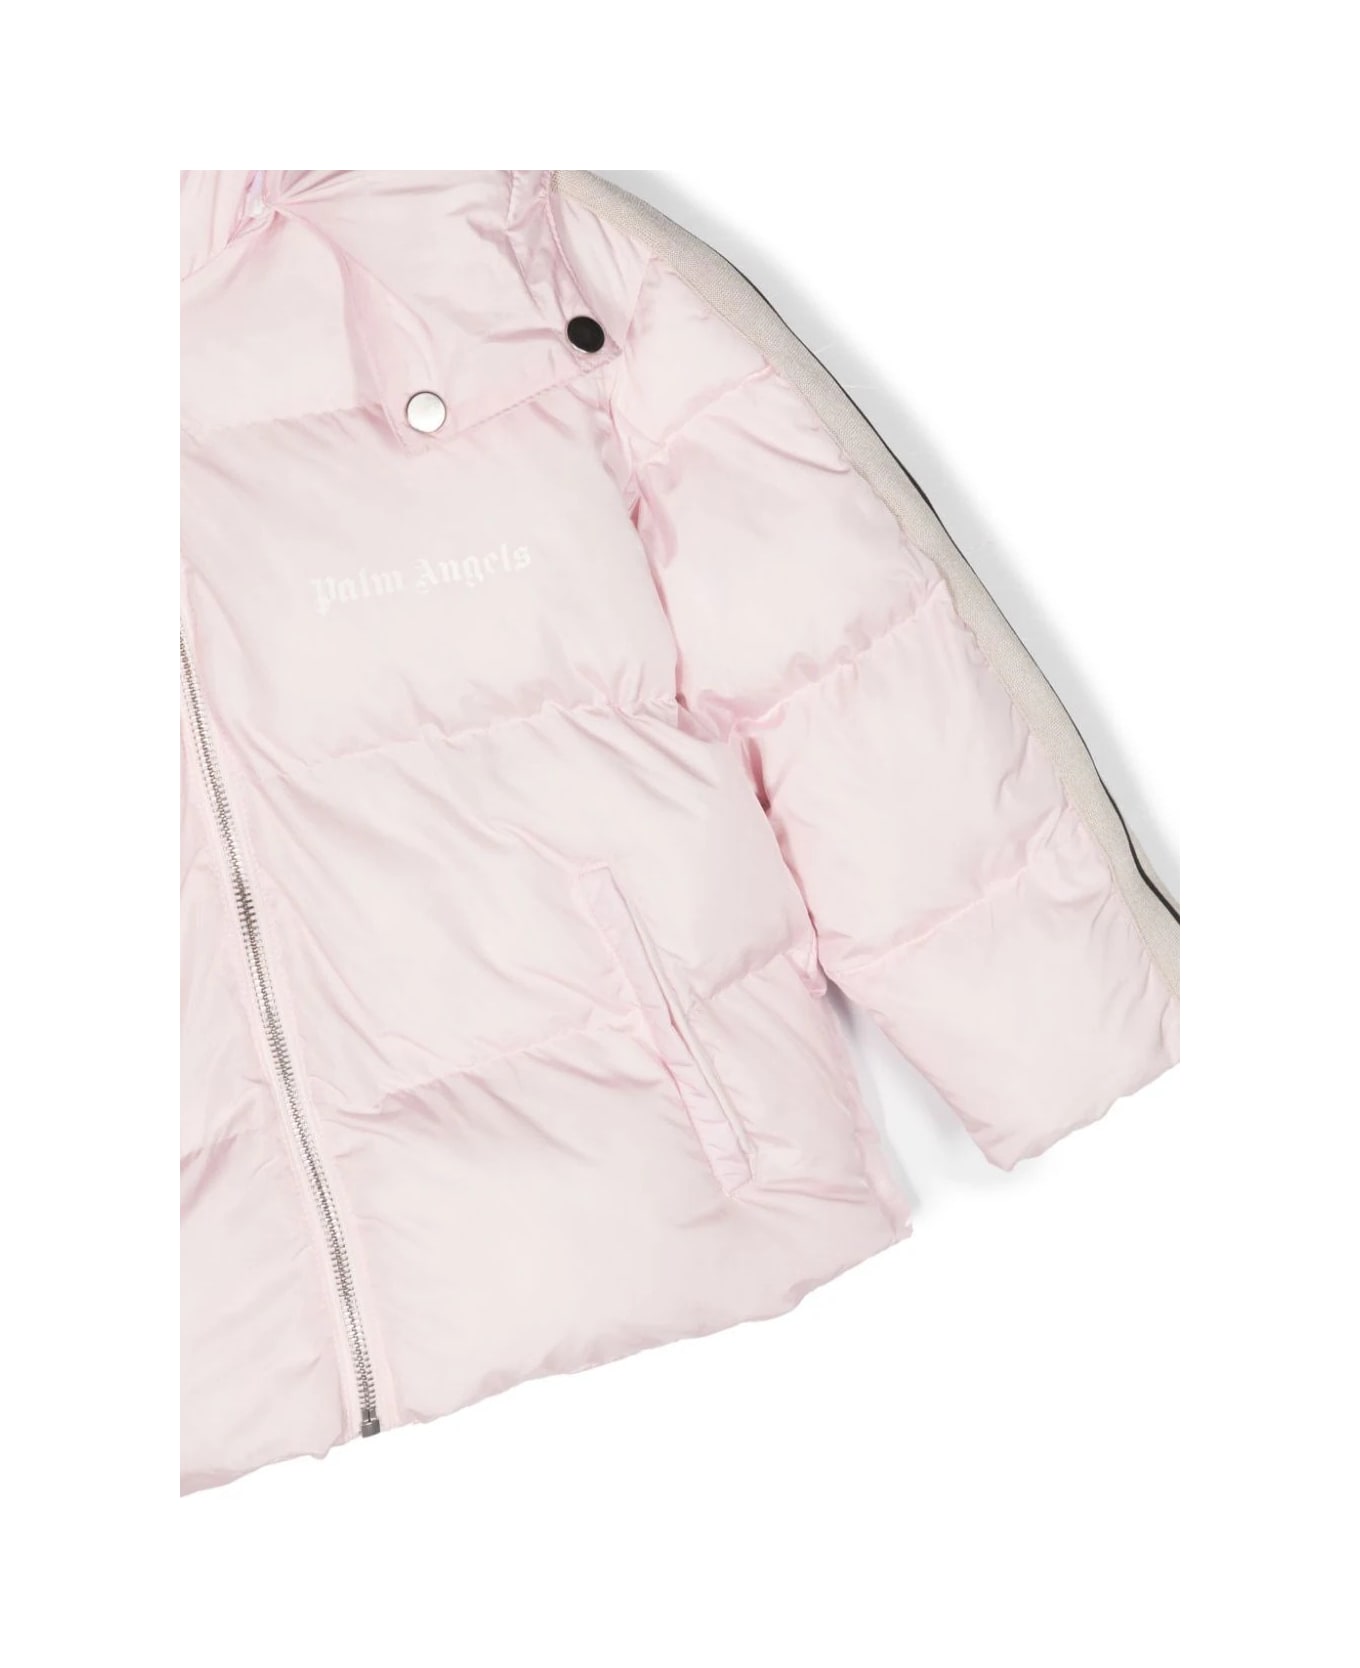 Palm Angels Pink Puffer Jacket With Logo - Pink